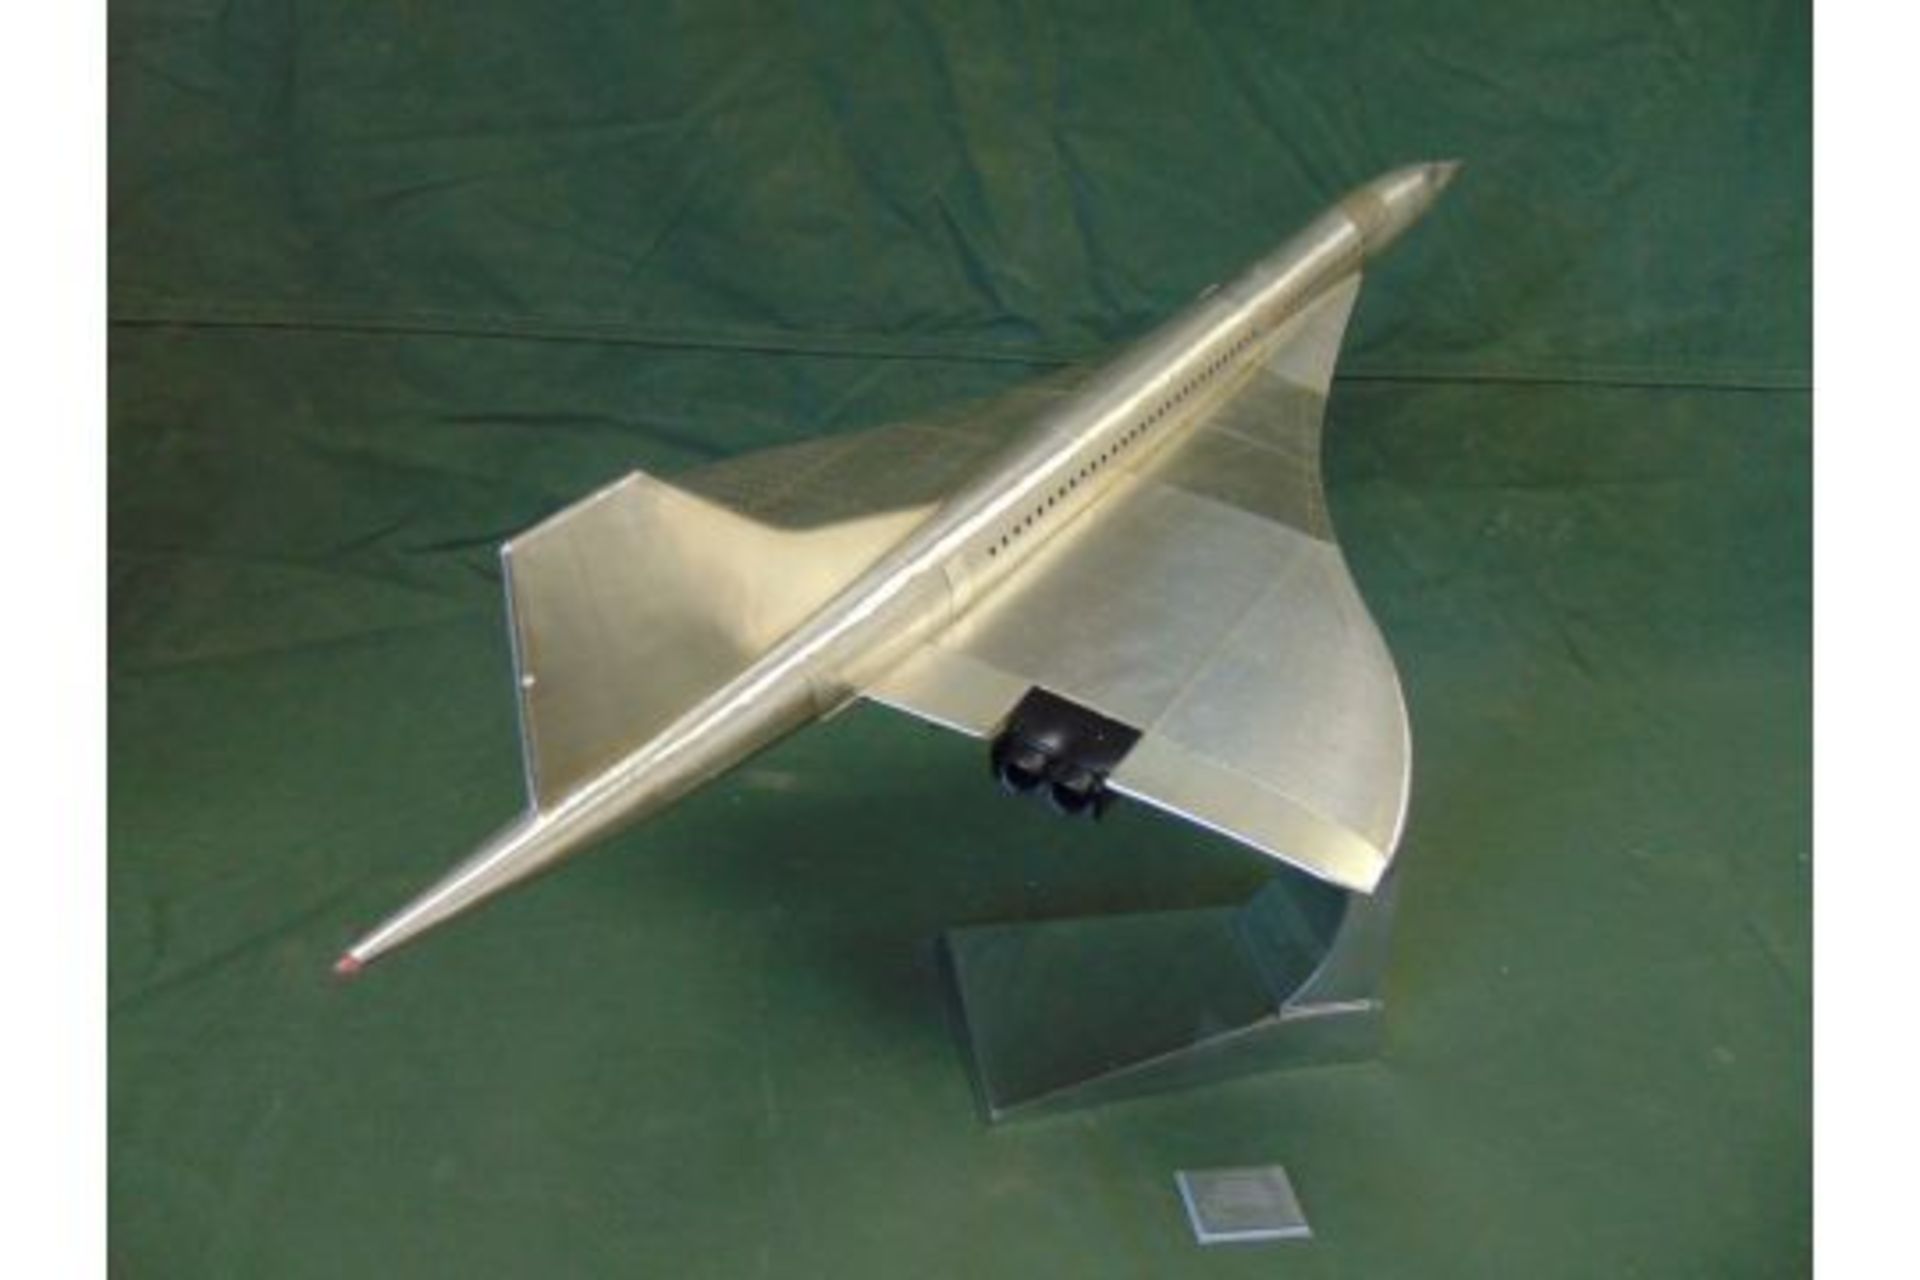 JUST LANDED A BEAUTIFUL!! Large Aluminium CONCORDE Model - Image 3 of 14